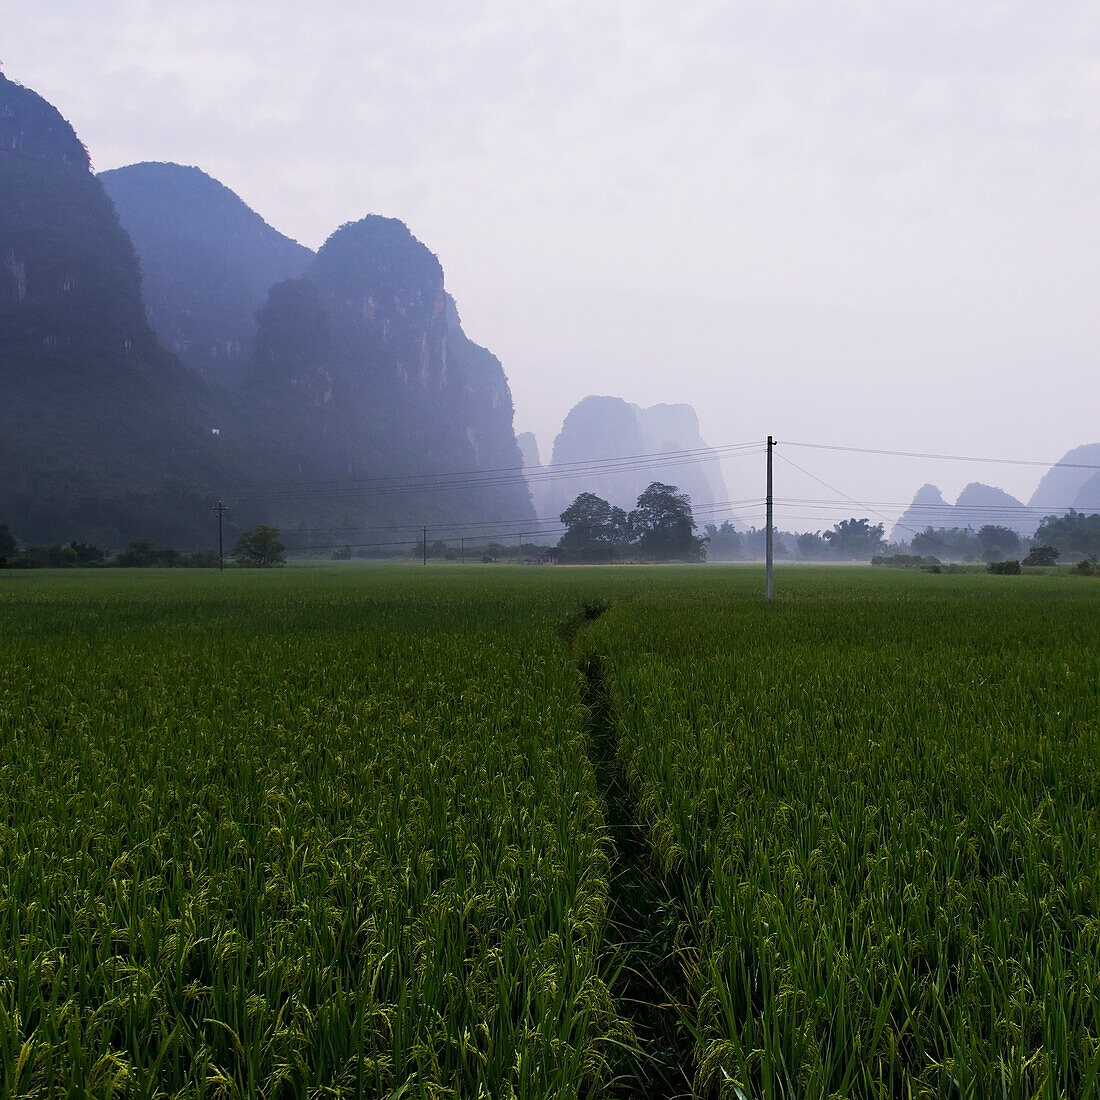 Landscape of rugged rock formations and a path going through a green crop in a field